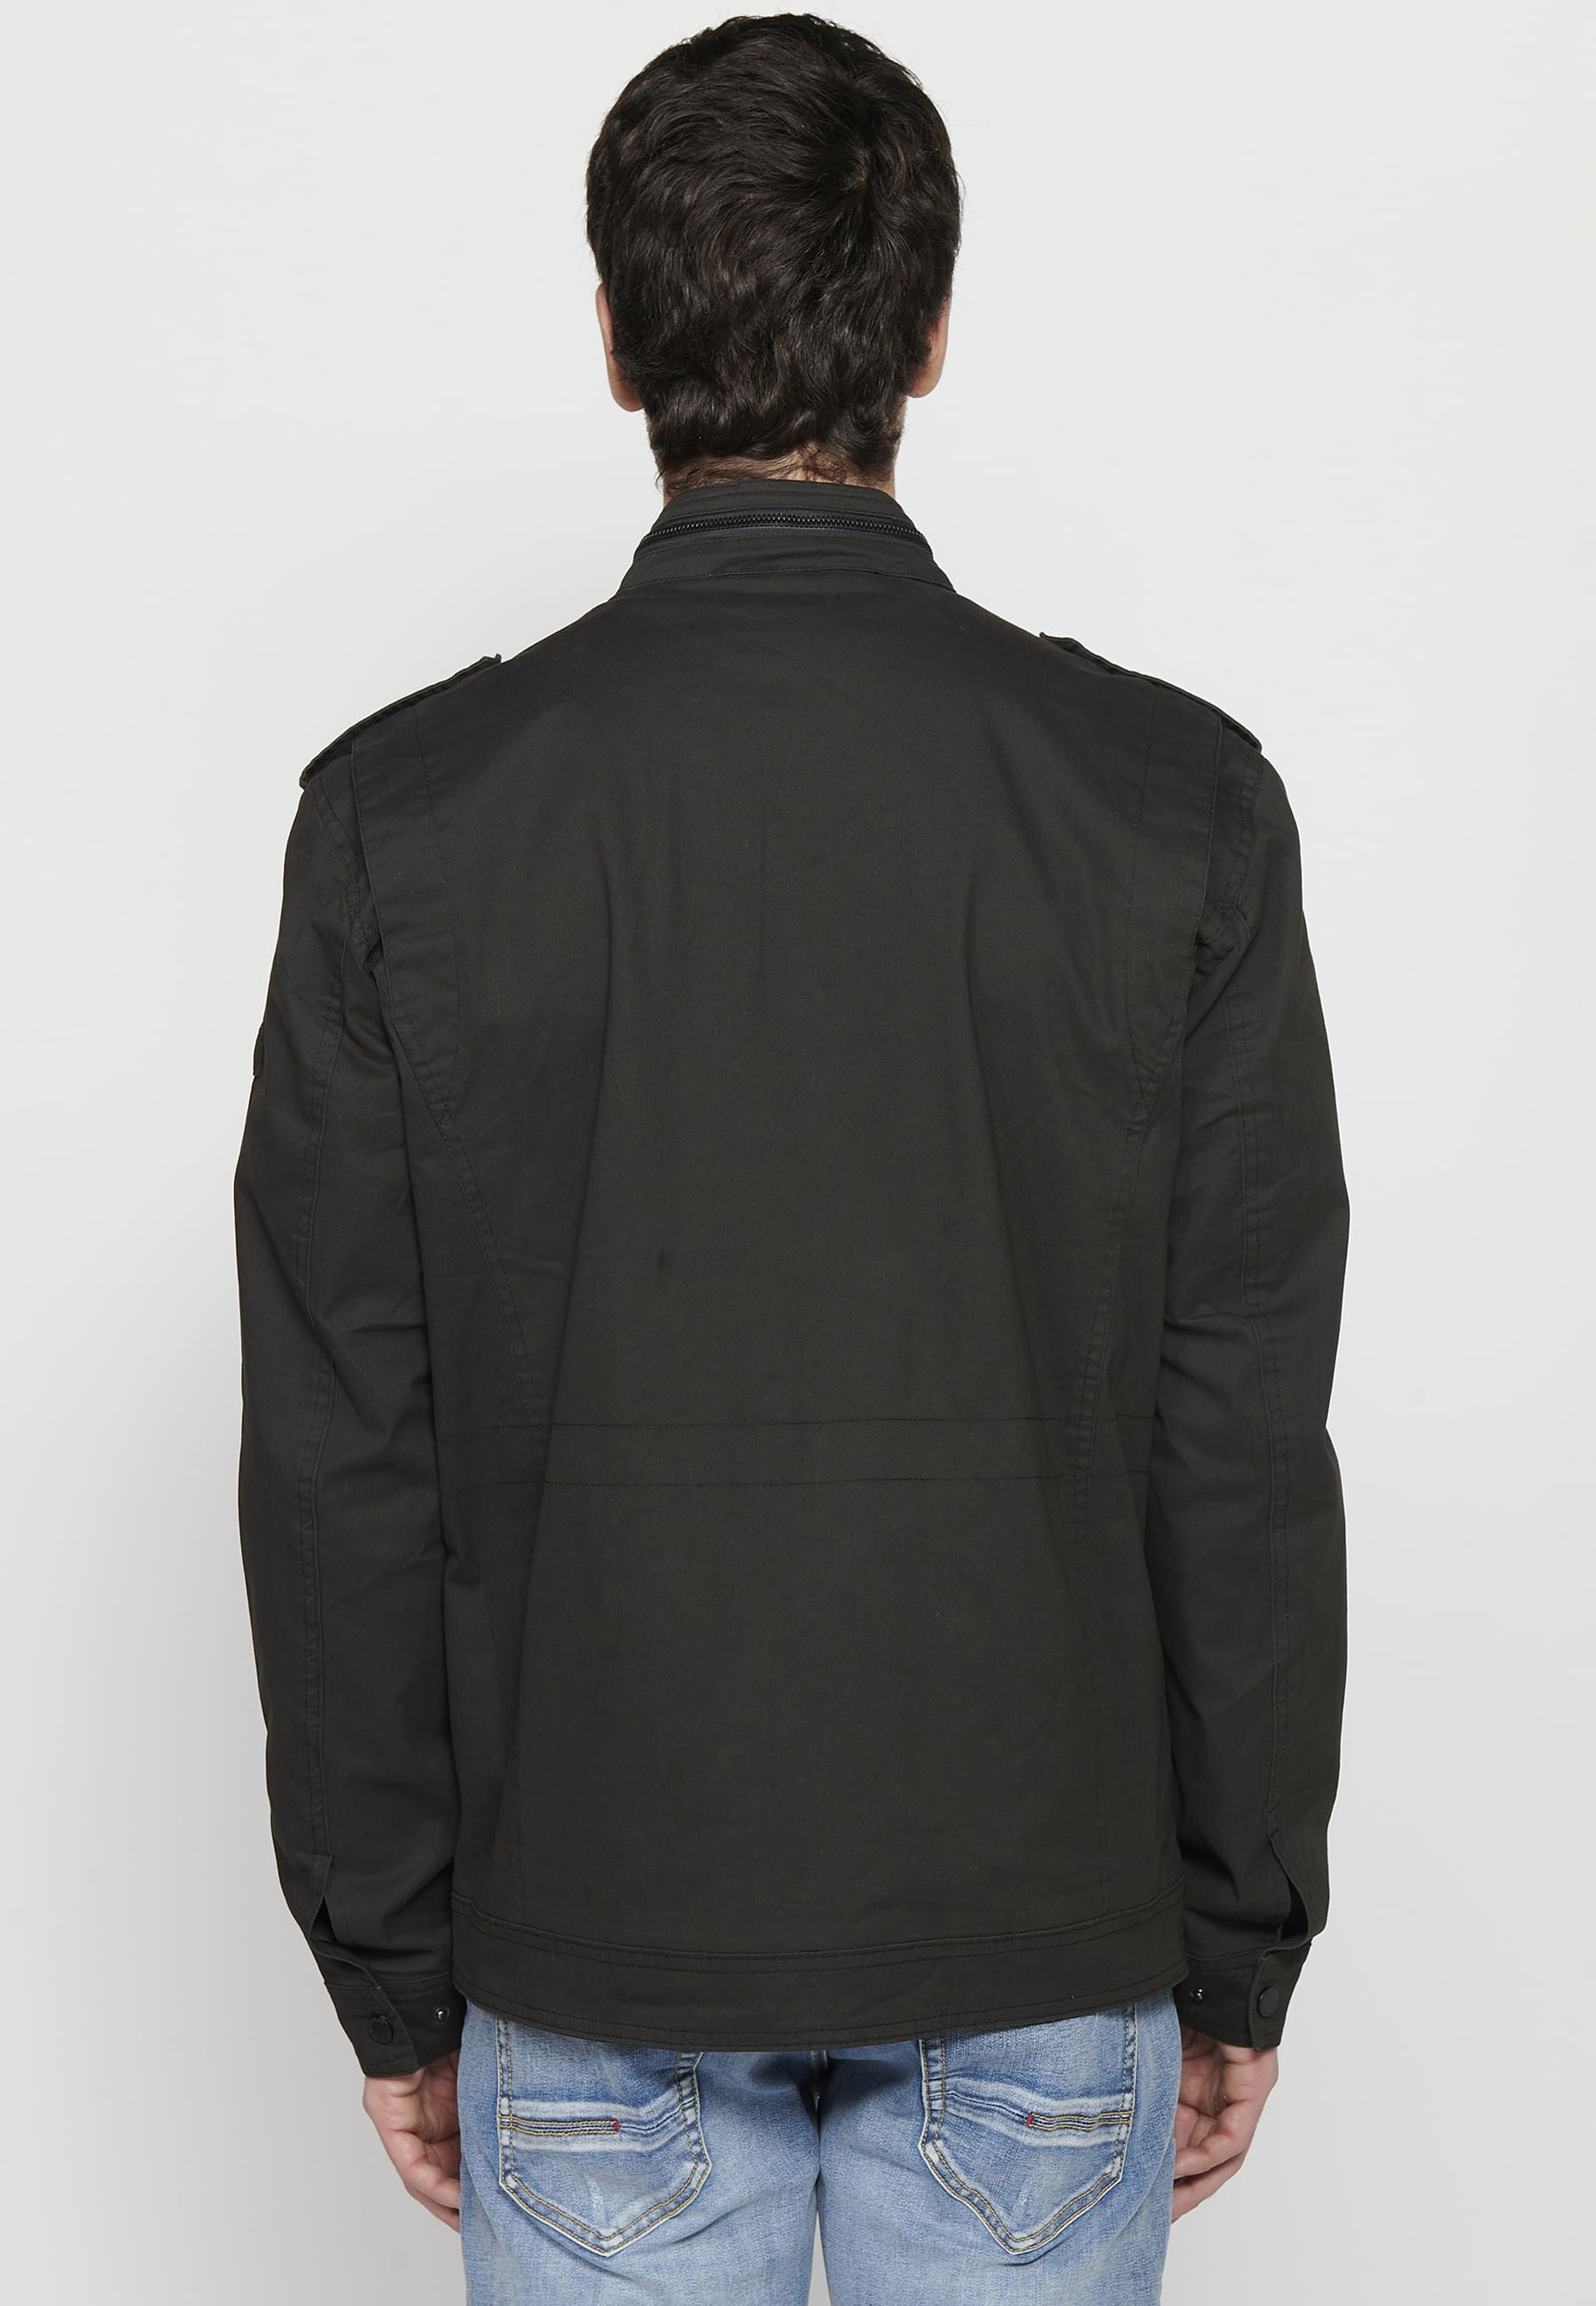 Long-sleeved jacket with high collar and front zipper closure with pockets in black for men. 6